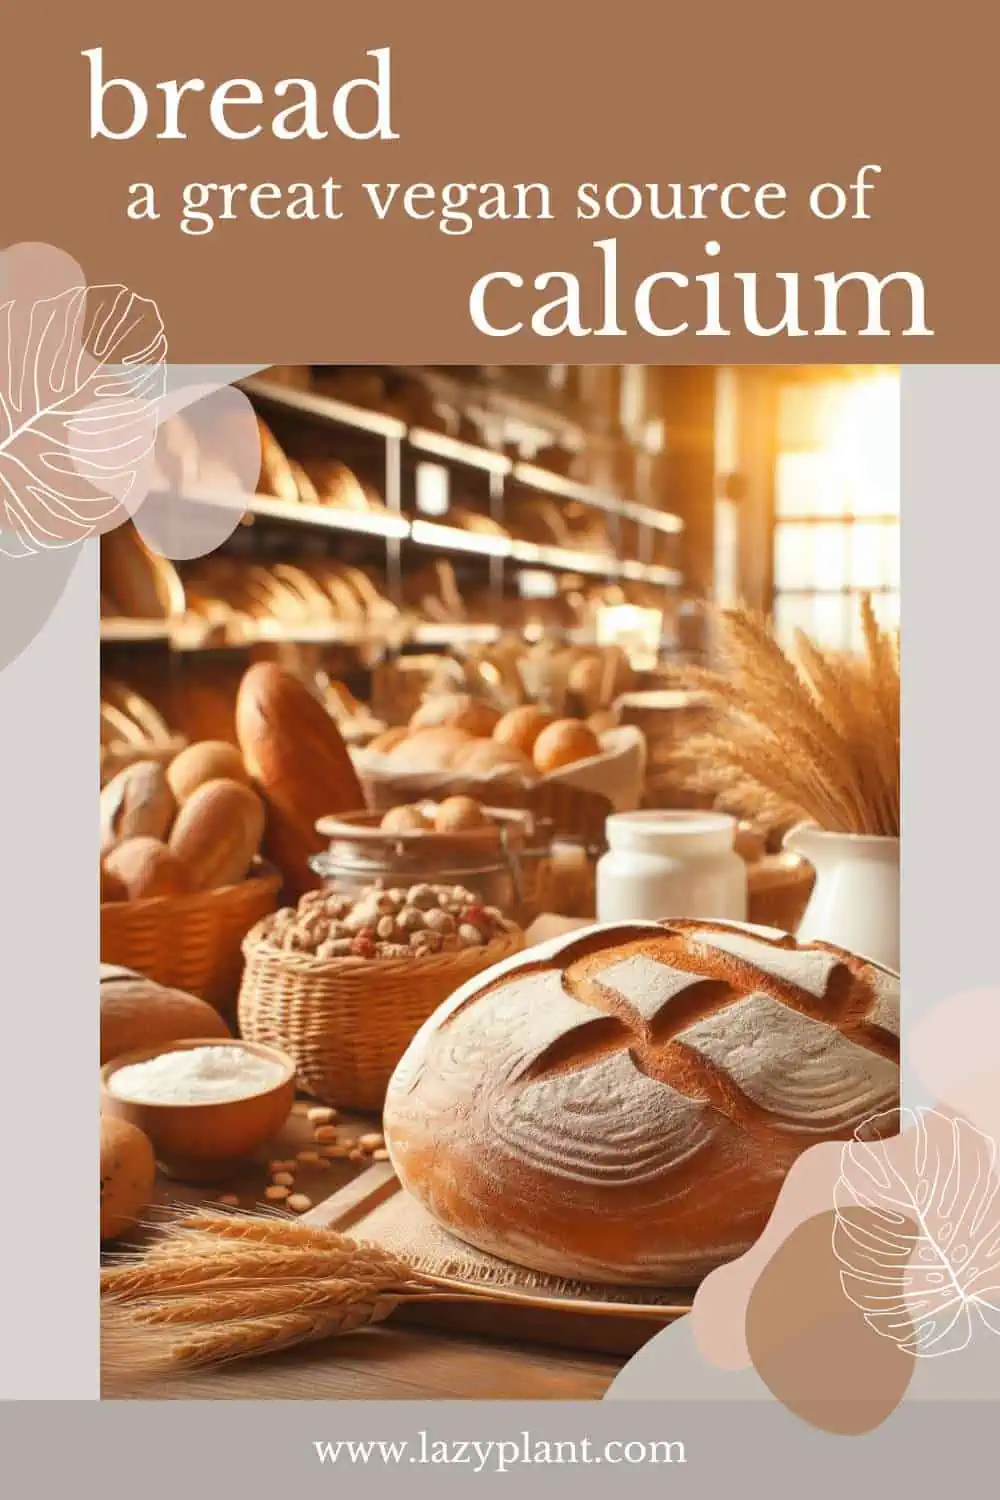 How to eat bread for increased calcium intake?